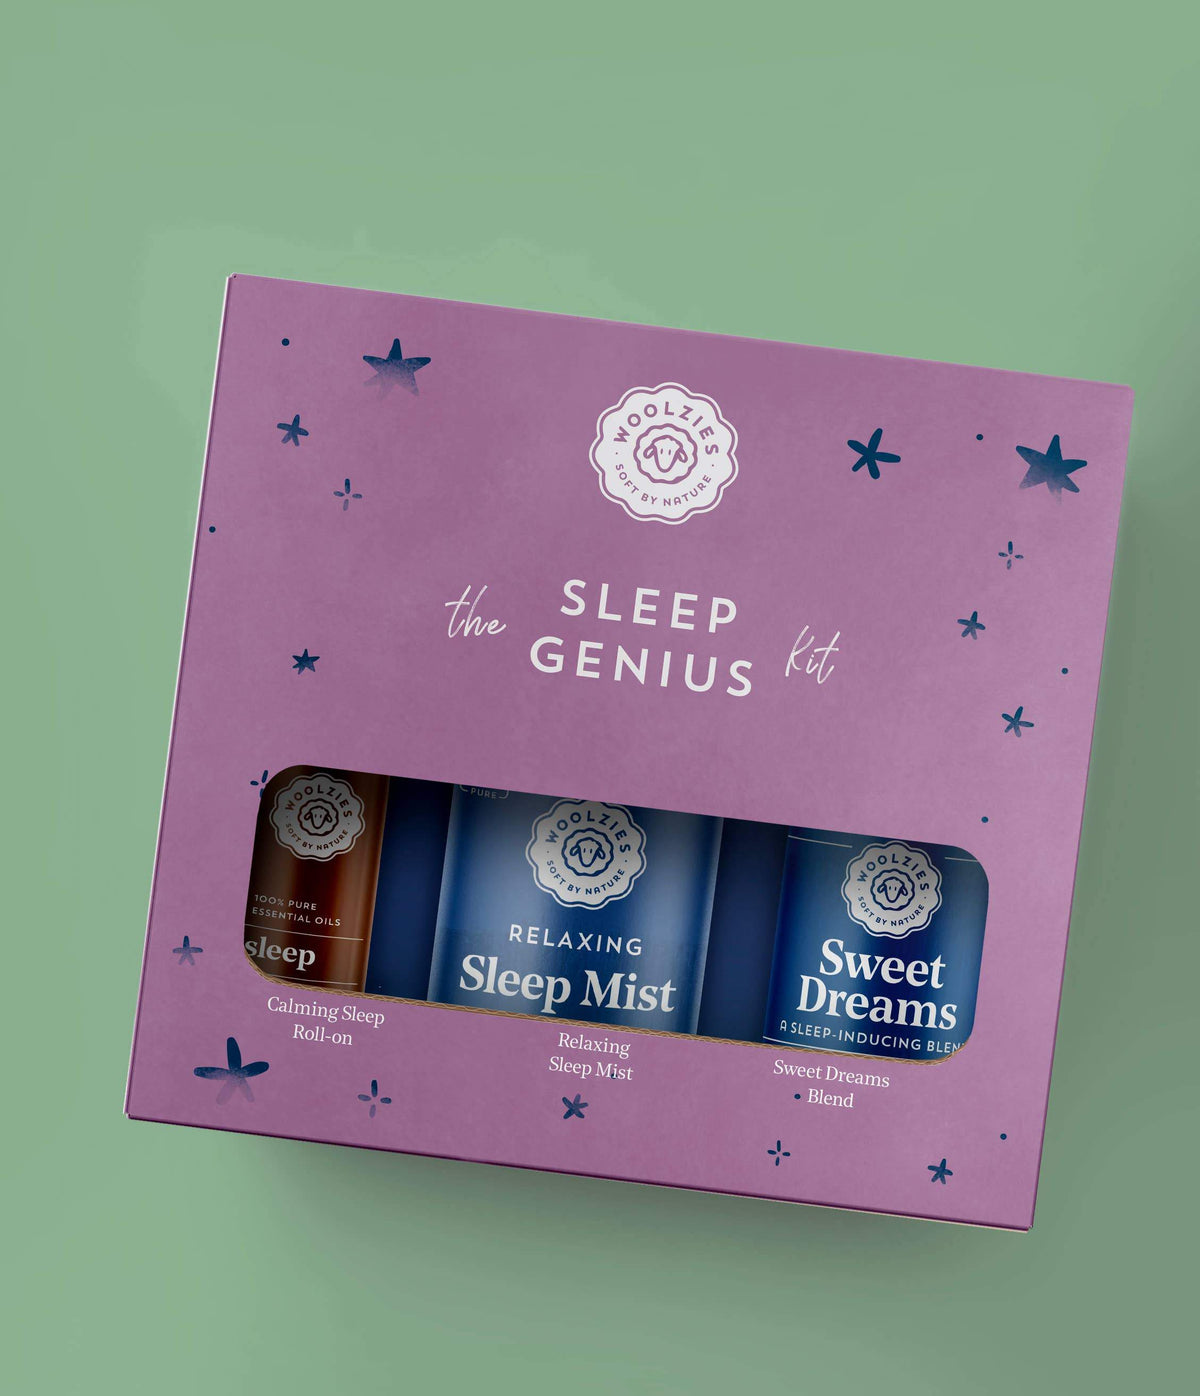 A purple "Woolzies The Sleep Genius Kit" box with three products: calming sleep roll-on, relaxing sleep mist, and sweet dreams sleep inhaler, all infused with stress-relieving essential oils; set against